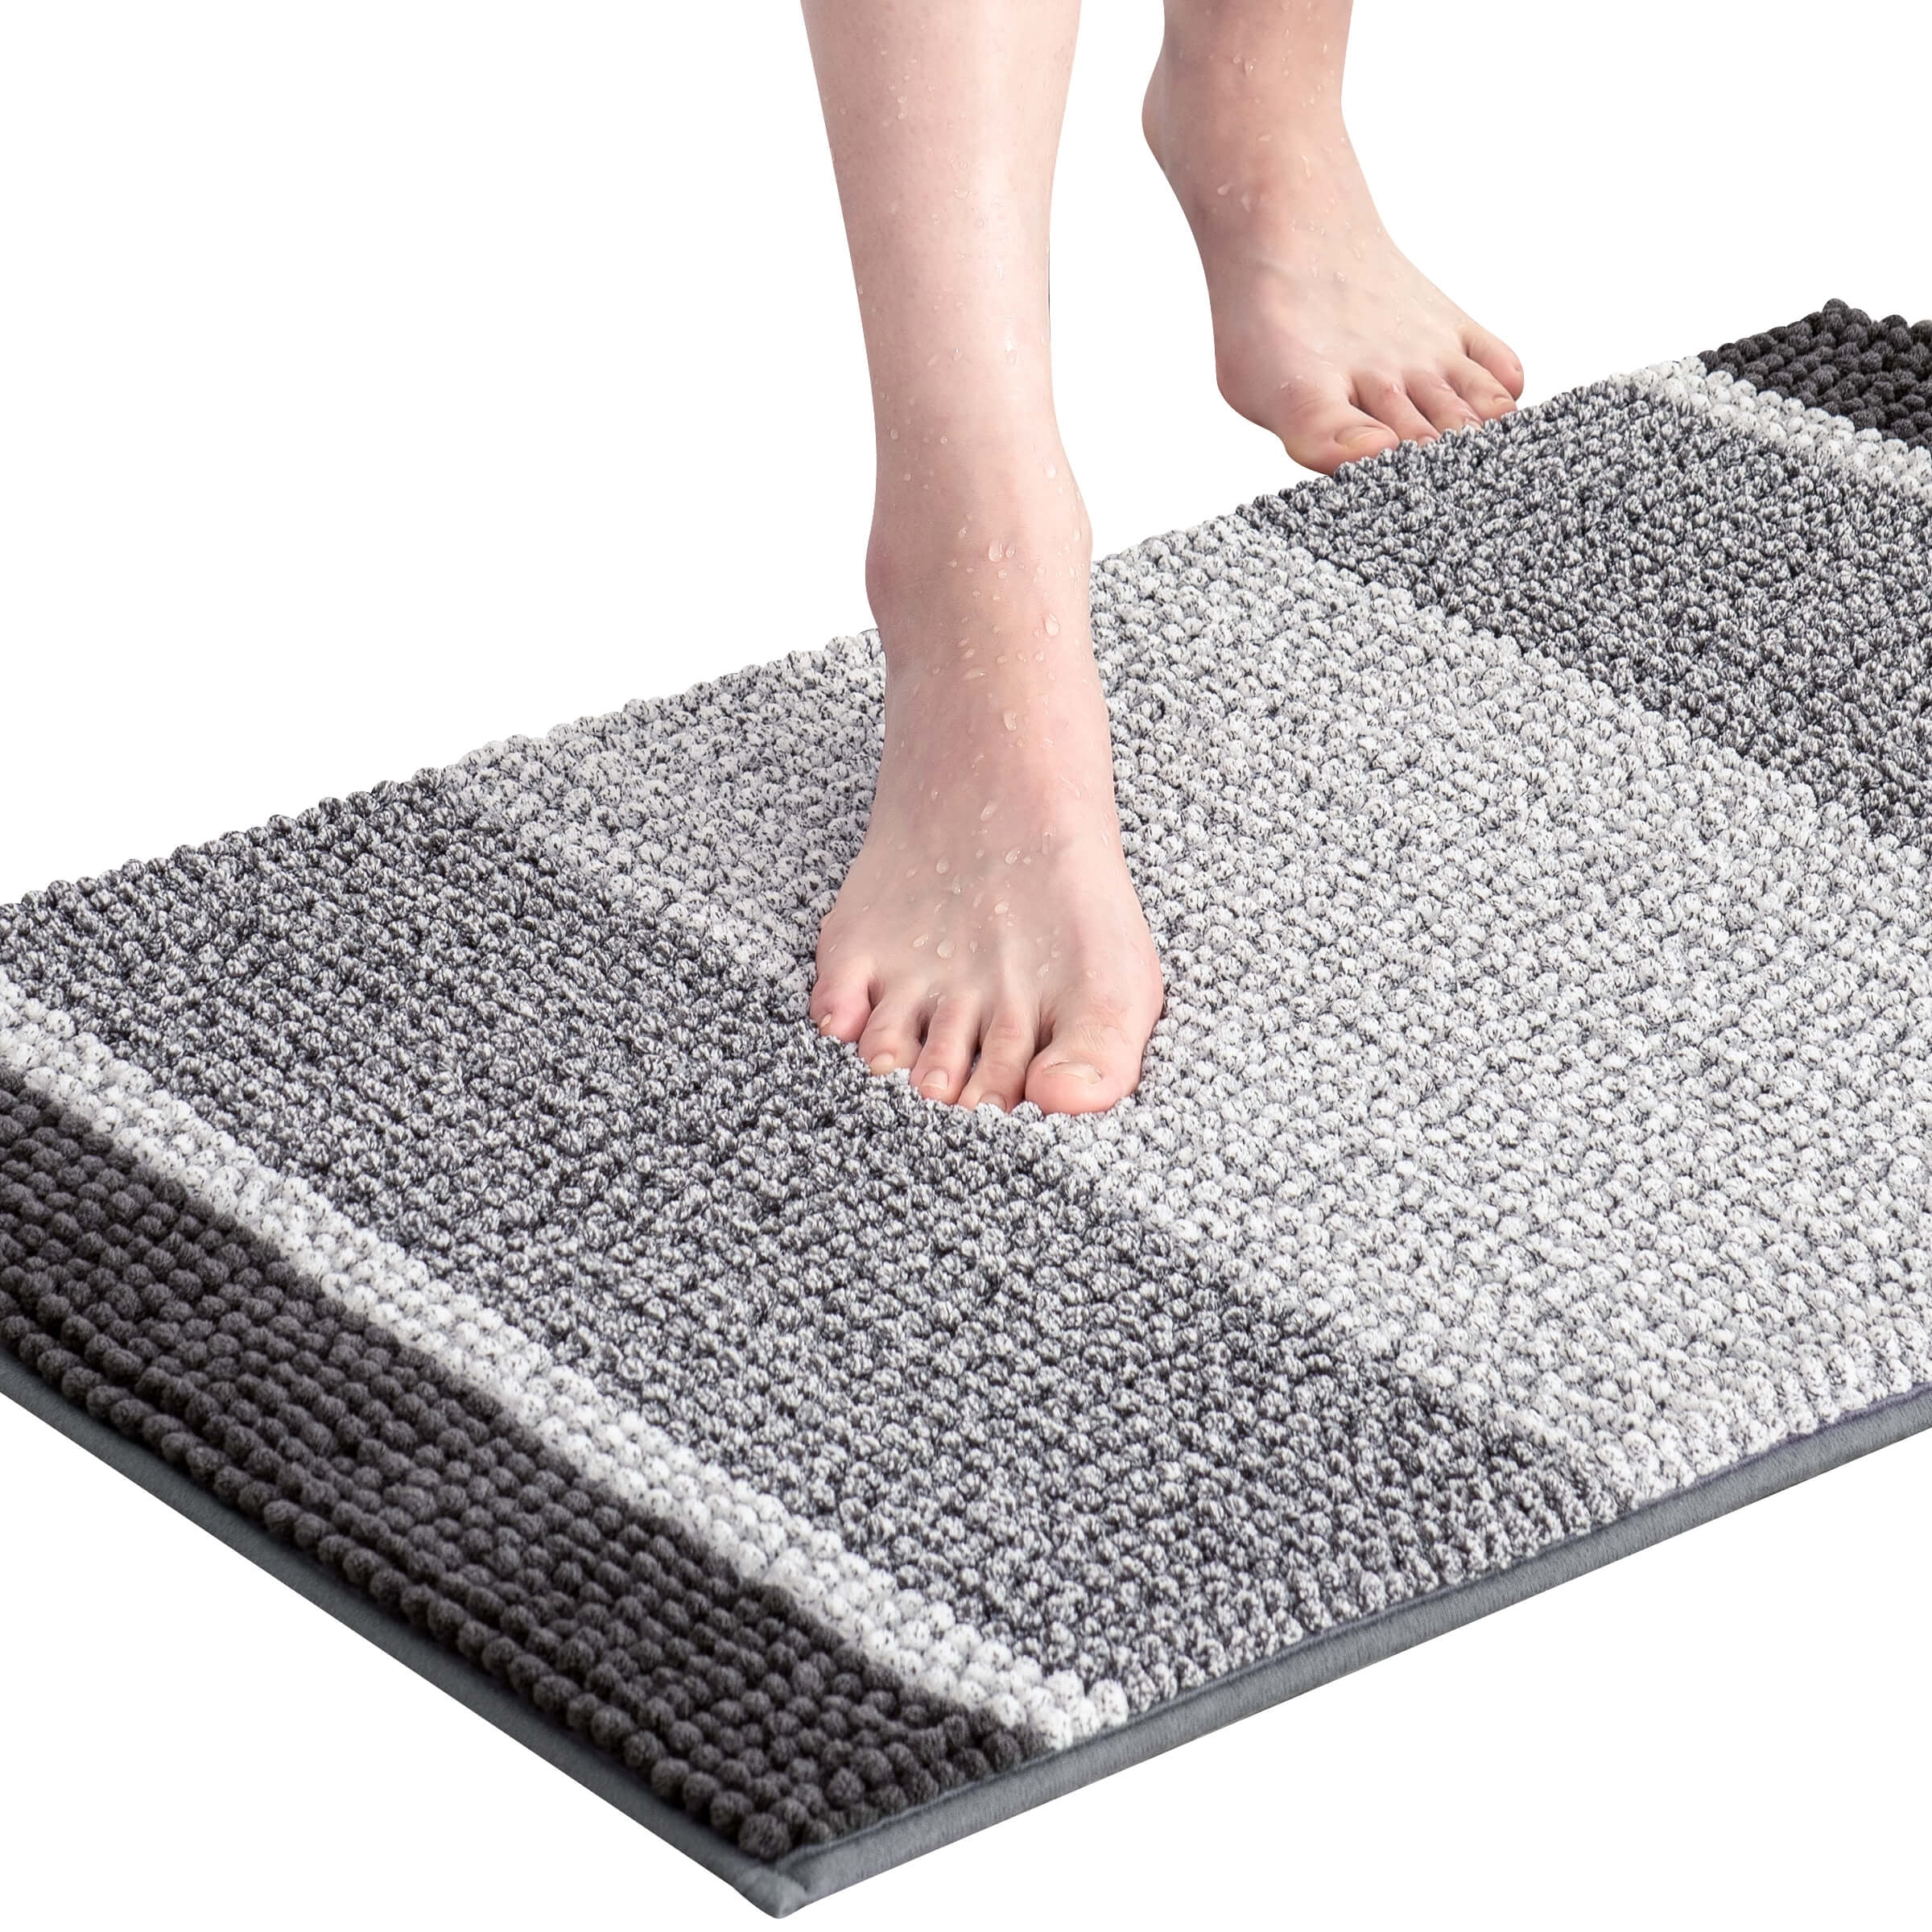  HOTBALZER Non-Slip Bathroom Rugs, Checkered Extra Soft Cute Bath  Mats, Water Absorbent, Machine Washable Small Bath Carpet for Tub, Shower  Sink(16x24, Grey) : Home & Kitchen